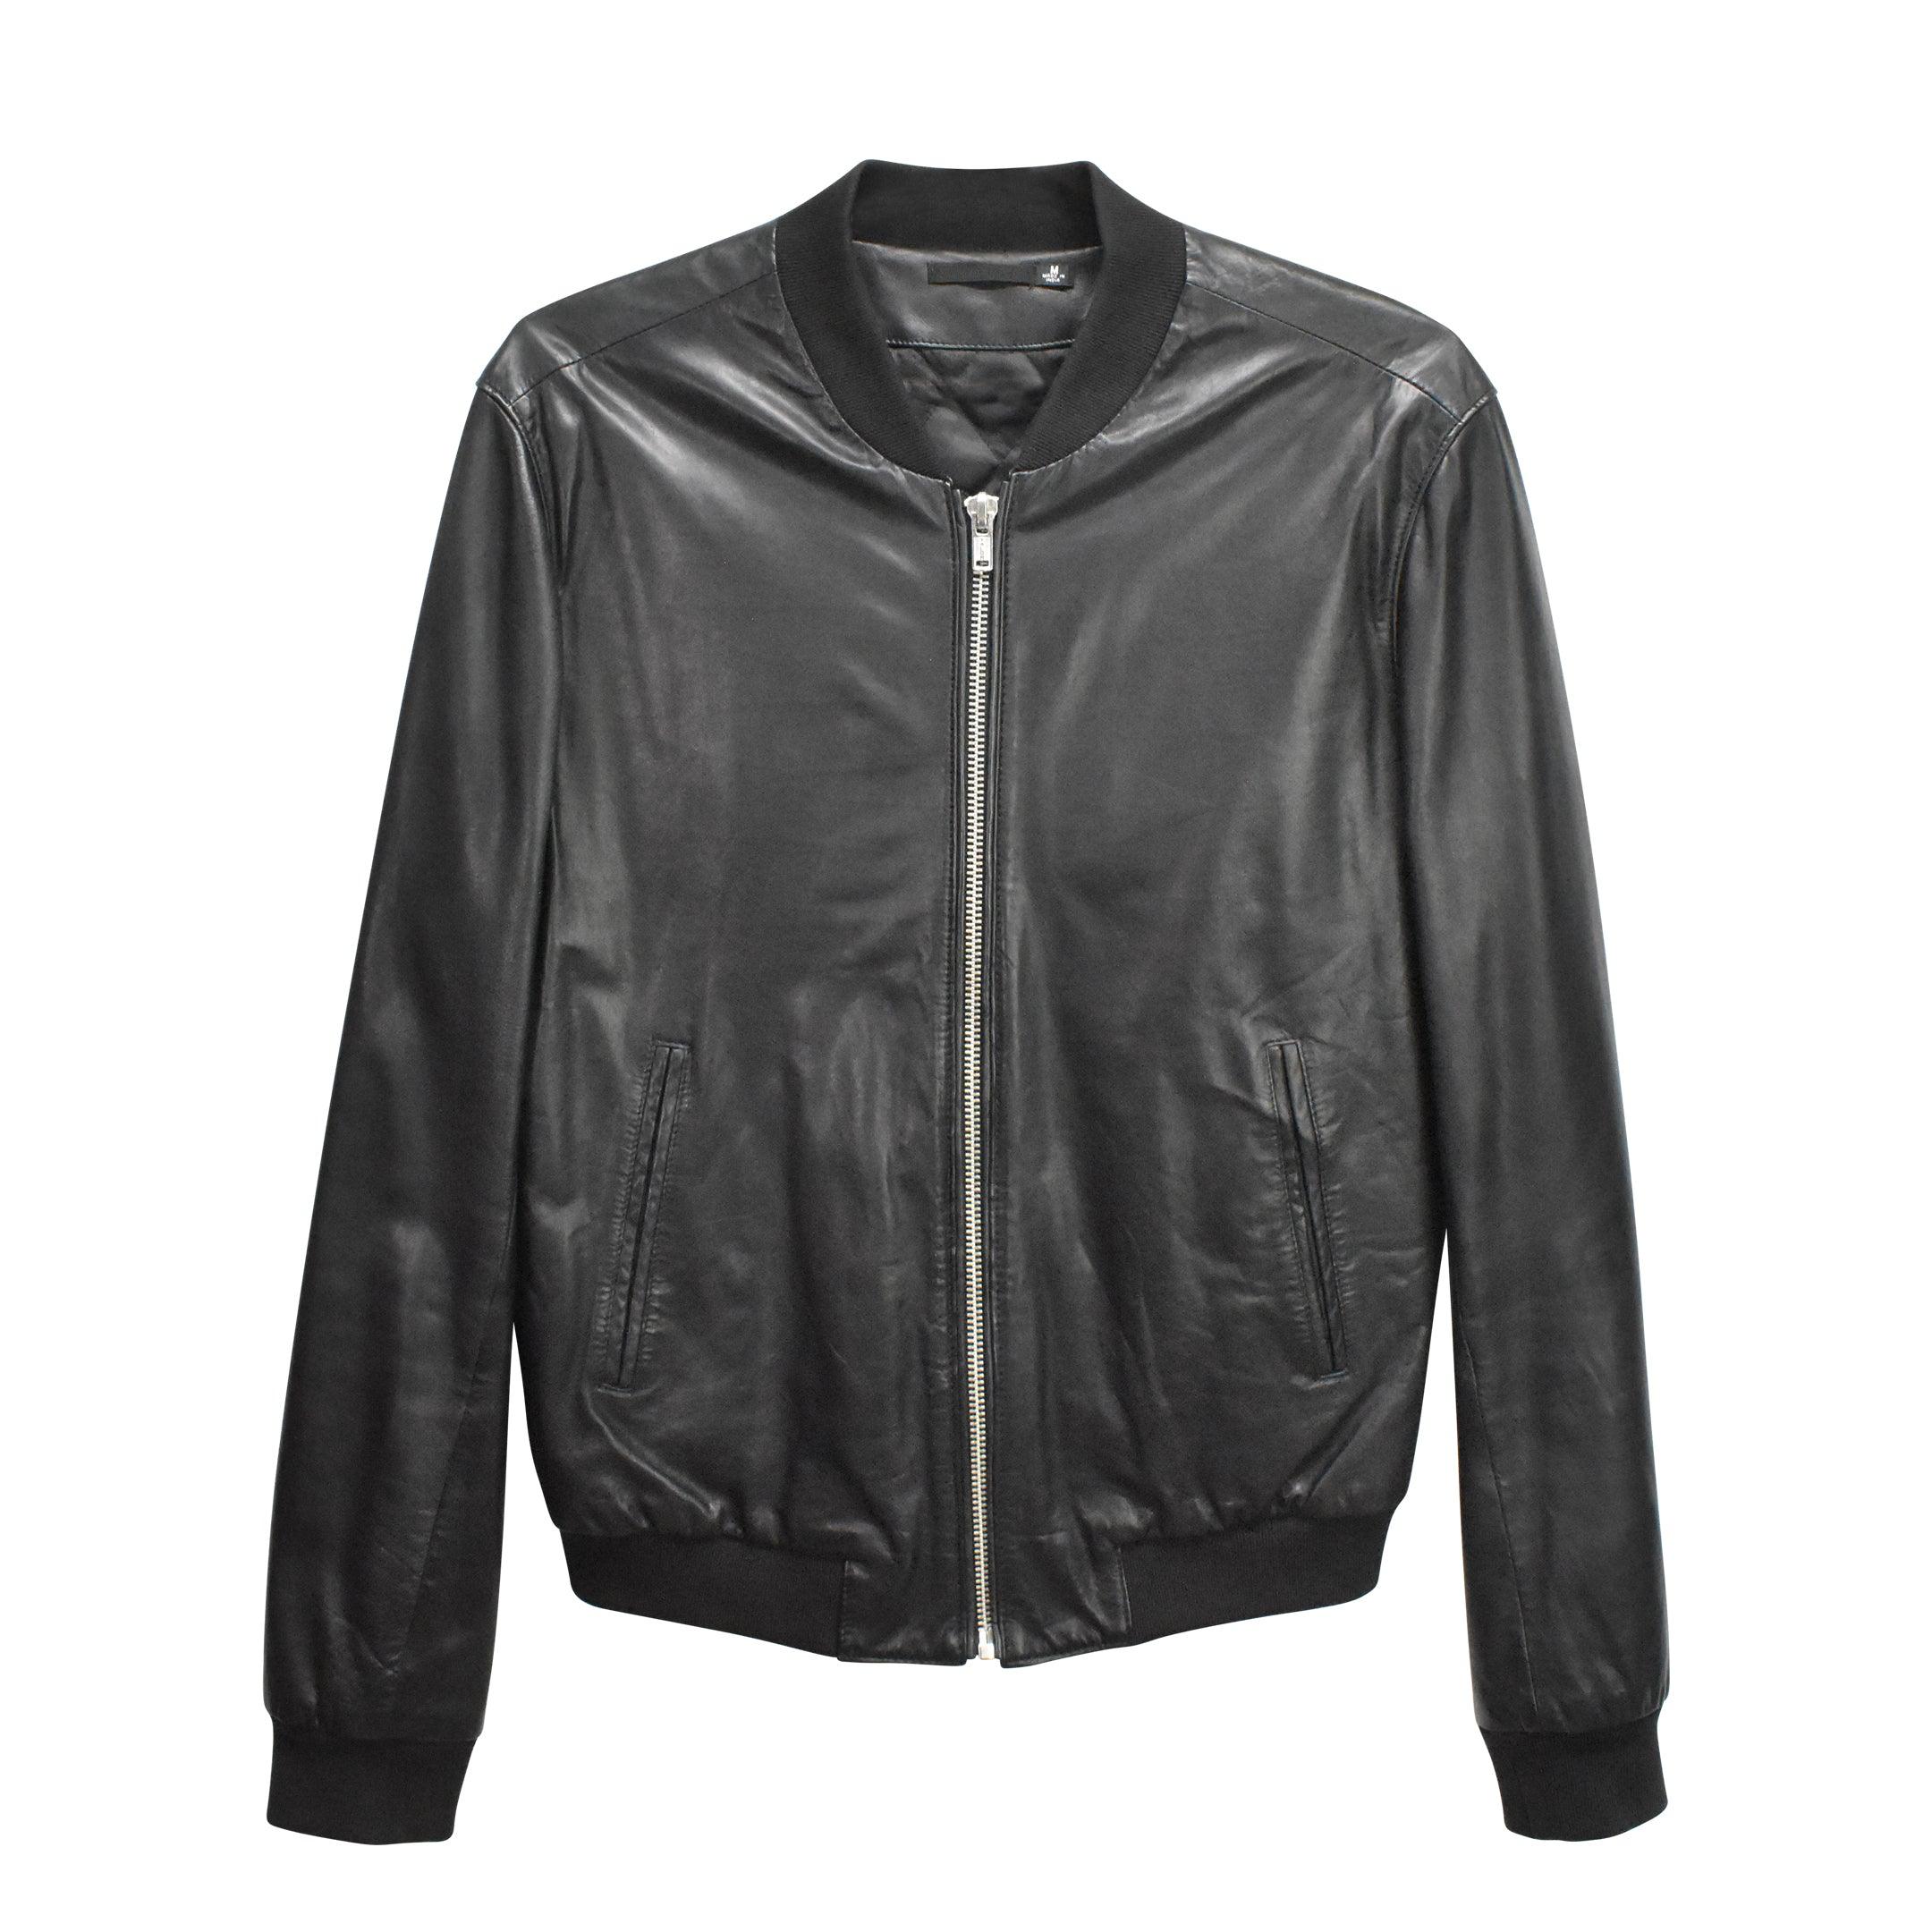 BLK DNM Leather Jacket - Men's M - Fashionably Yours